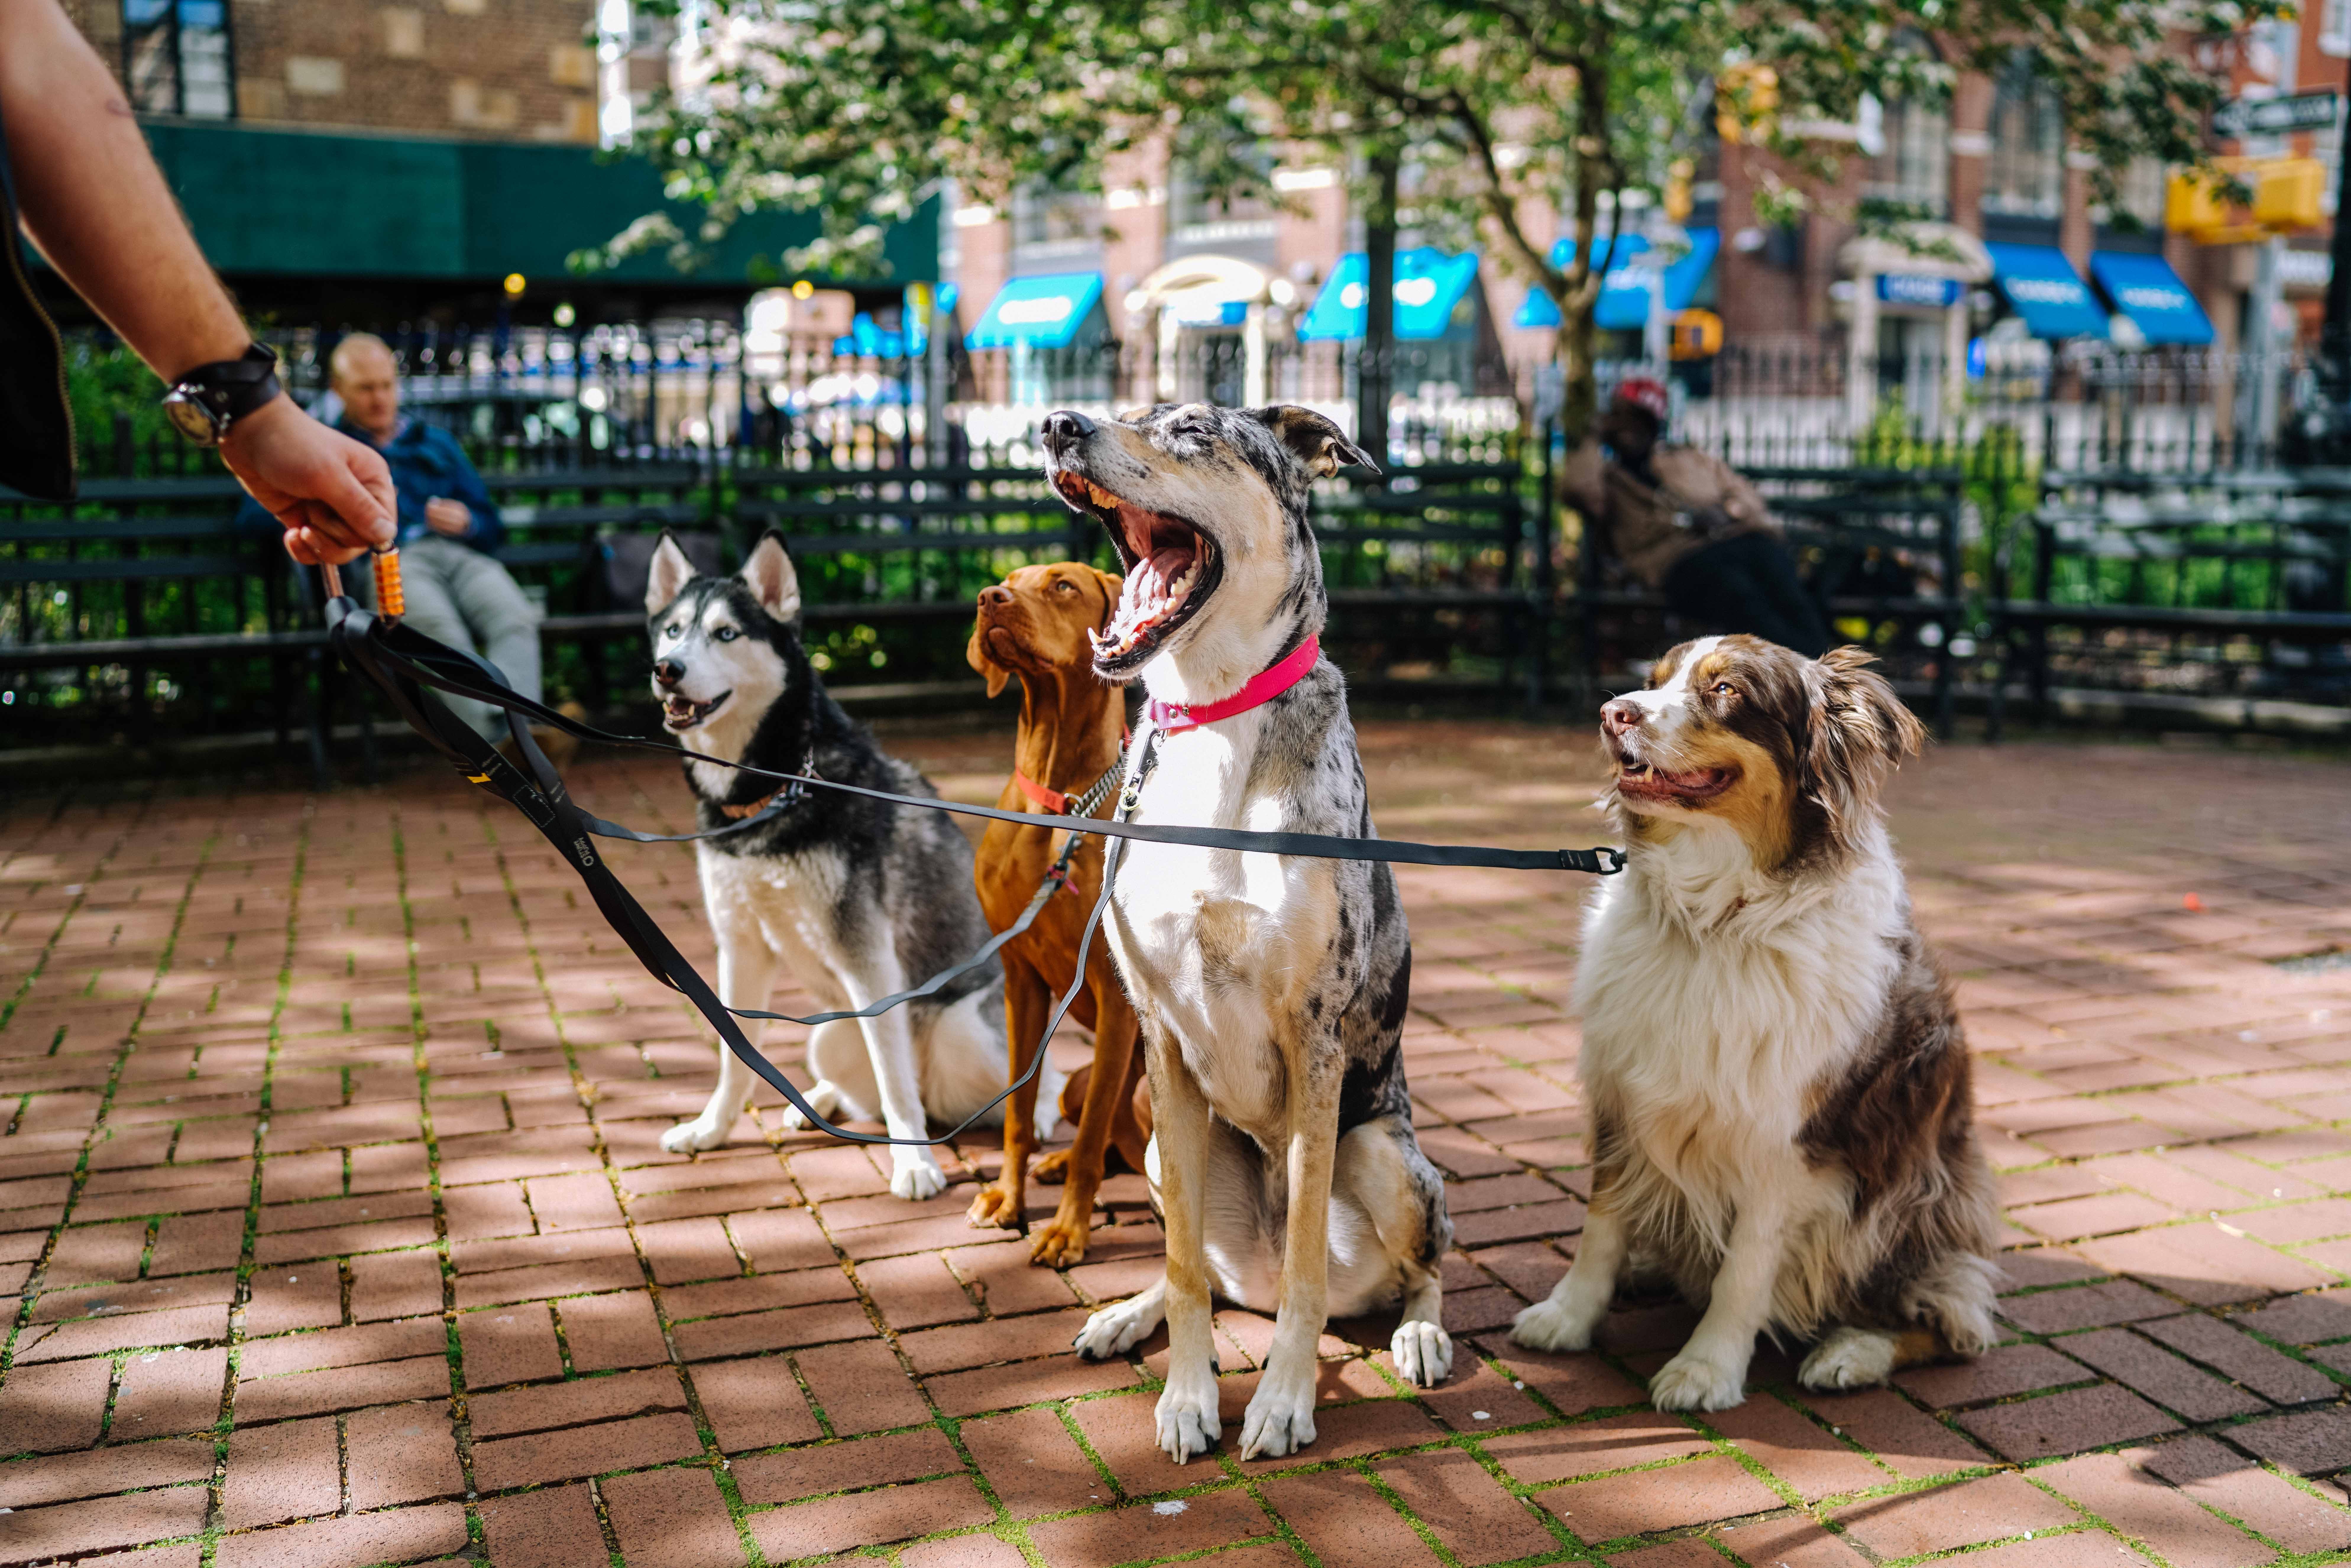  Four dogs on leashes sit in the middle of a city park